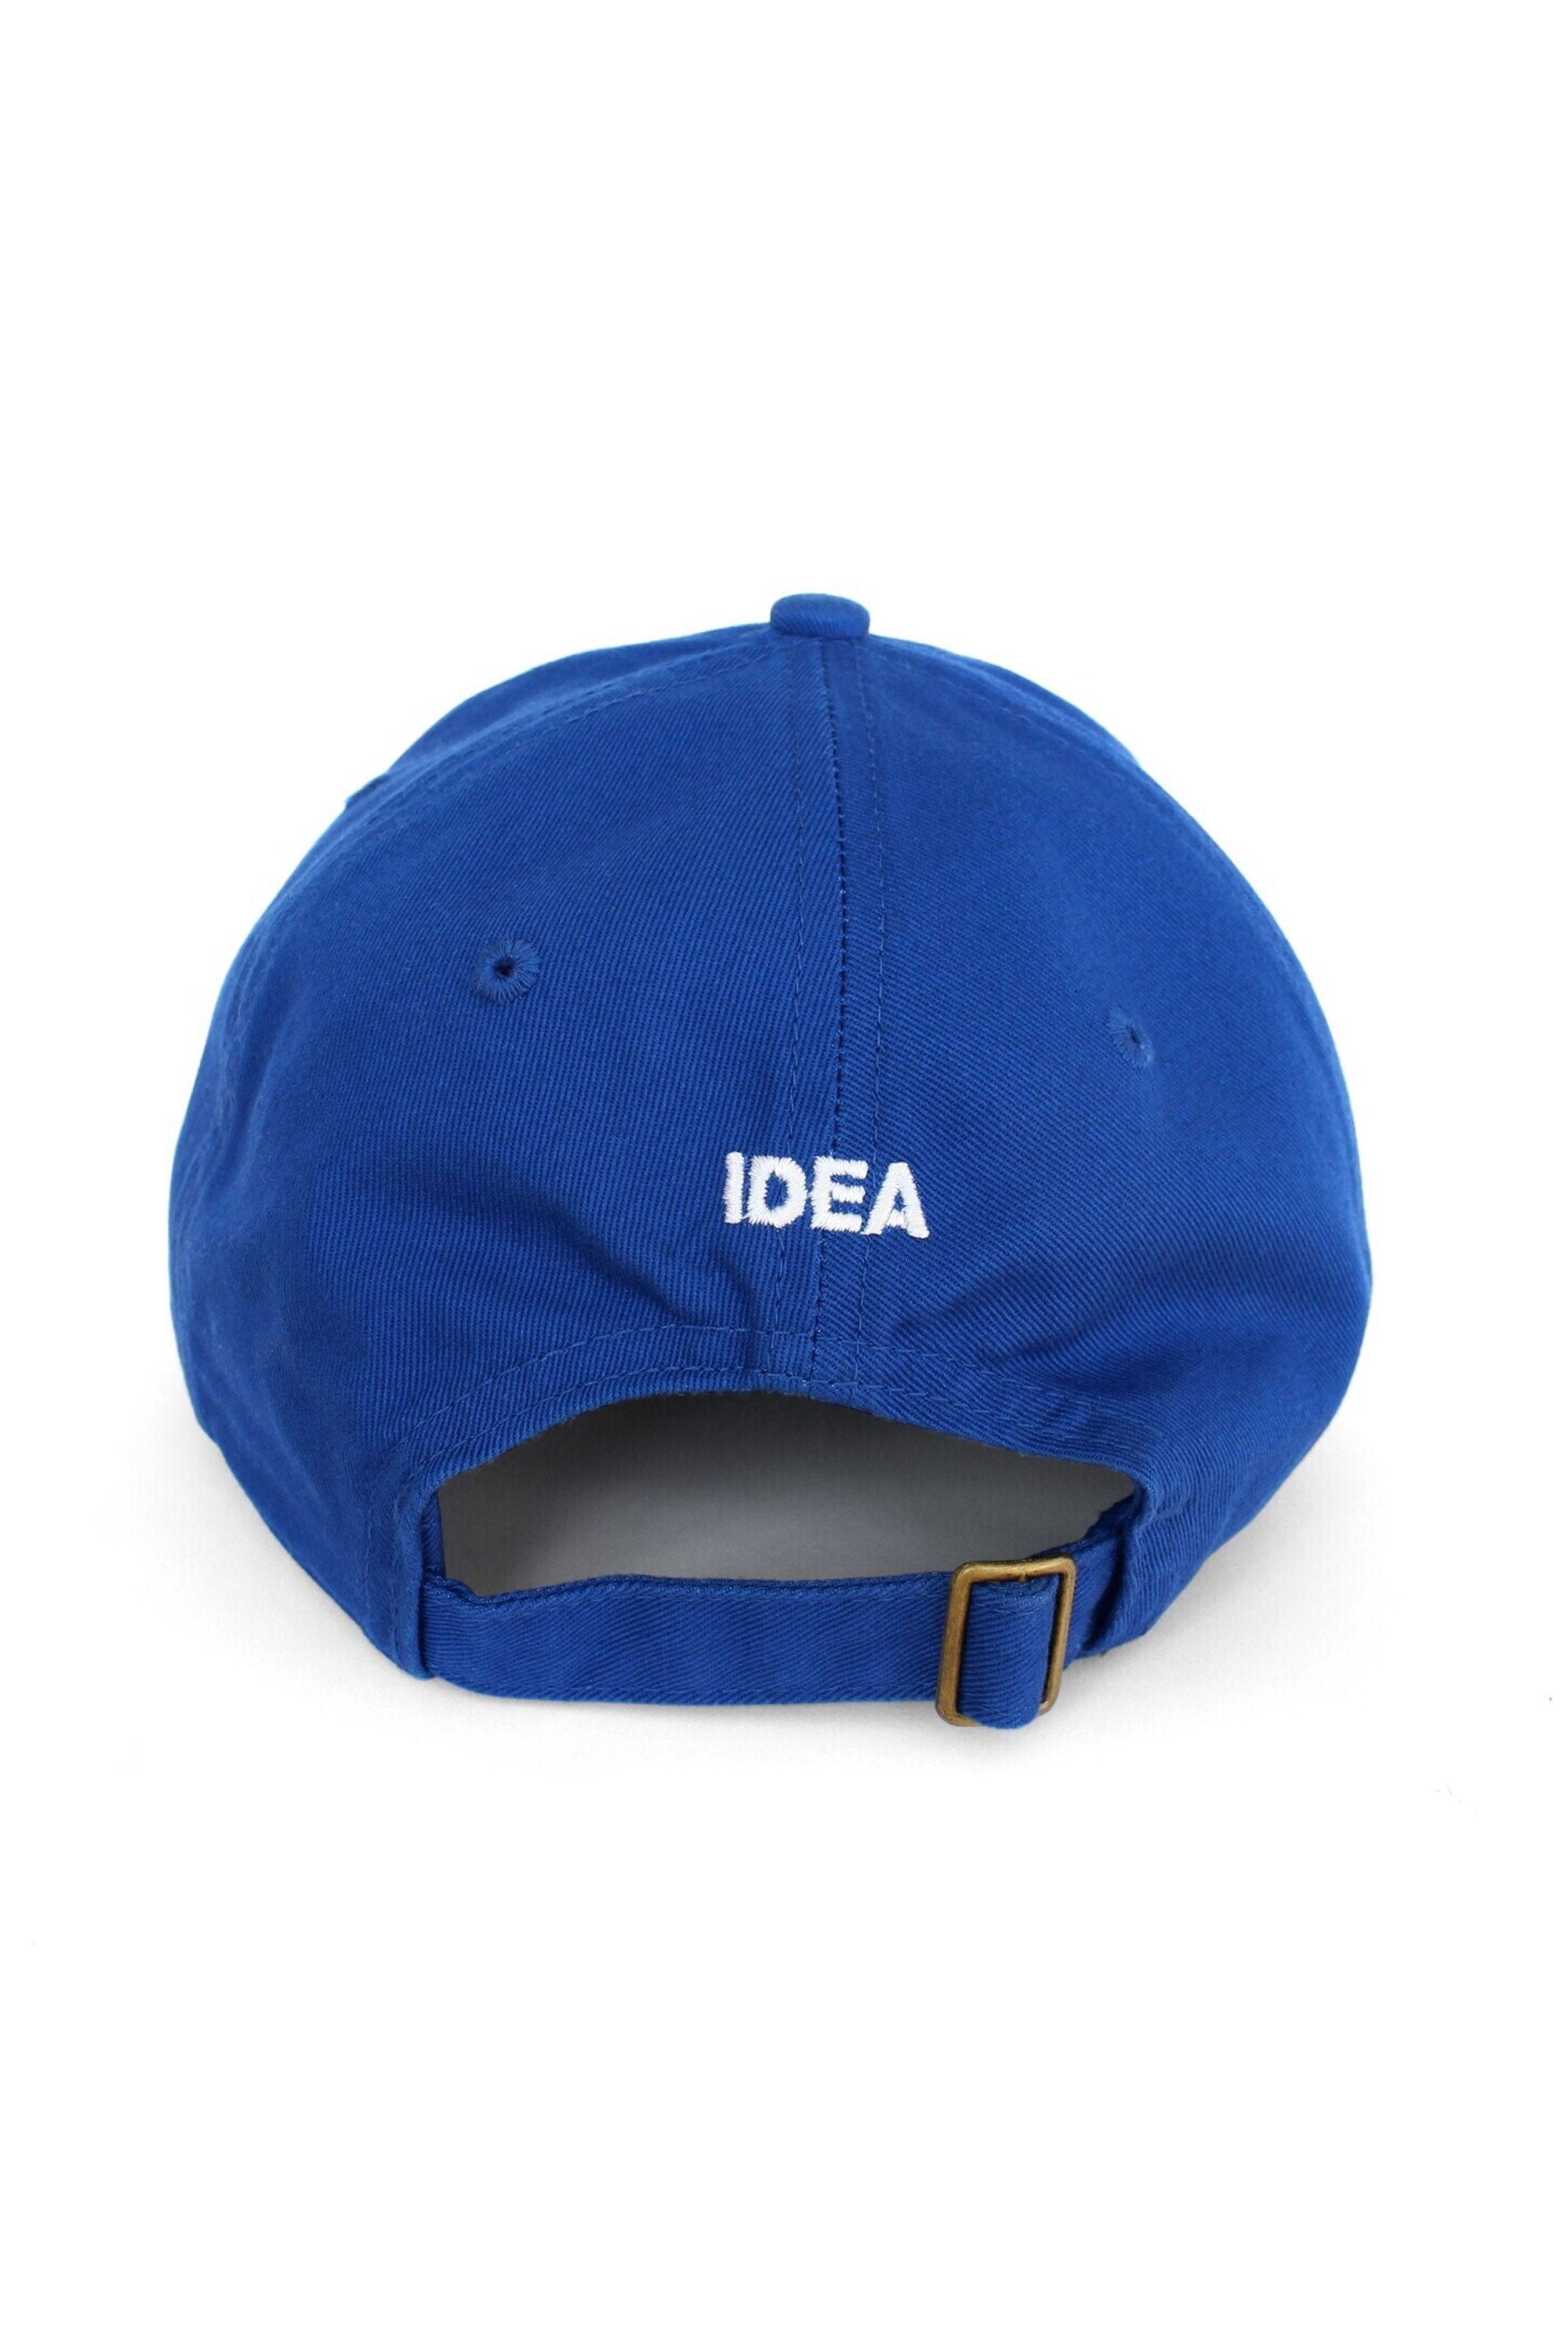 The IDEA - IN A MEETING  available online with global shipping, and in PAM Stores Melbourne and Sydney.